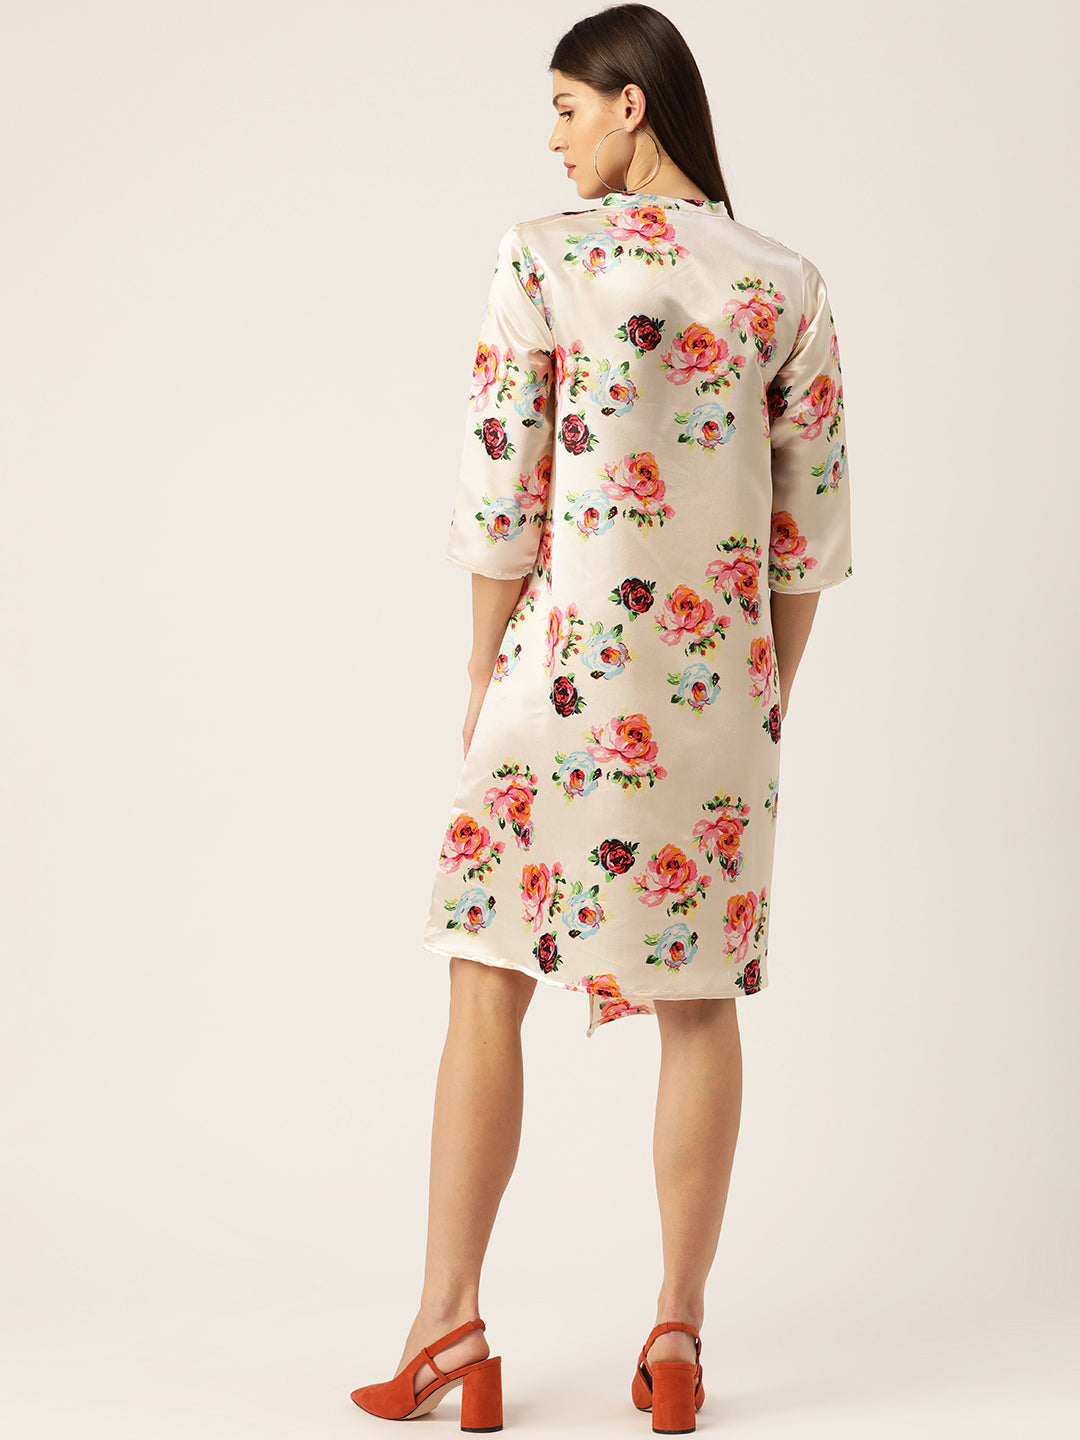 Women Cream-Colored & Pink Floral Printed Satin Finish Wrap Dress